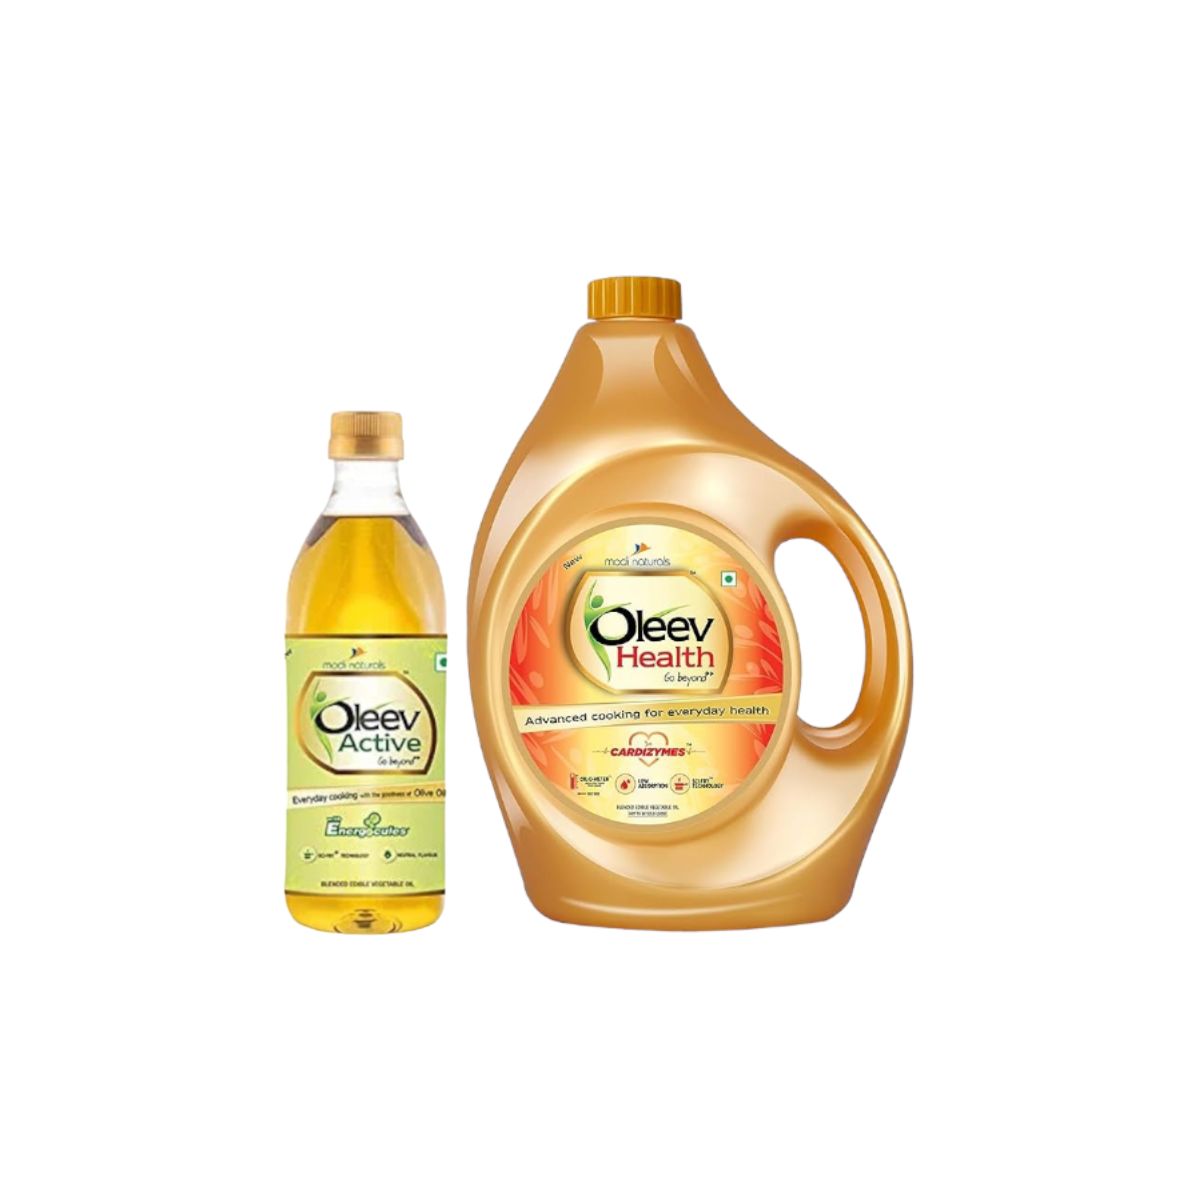 Oleev Health With Goodness of Olive Oil - 5L With 1L Free